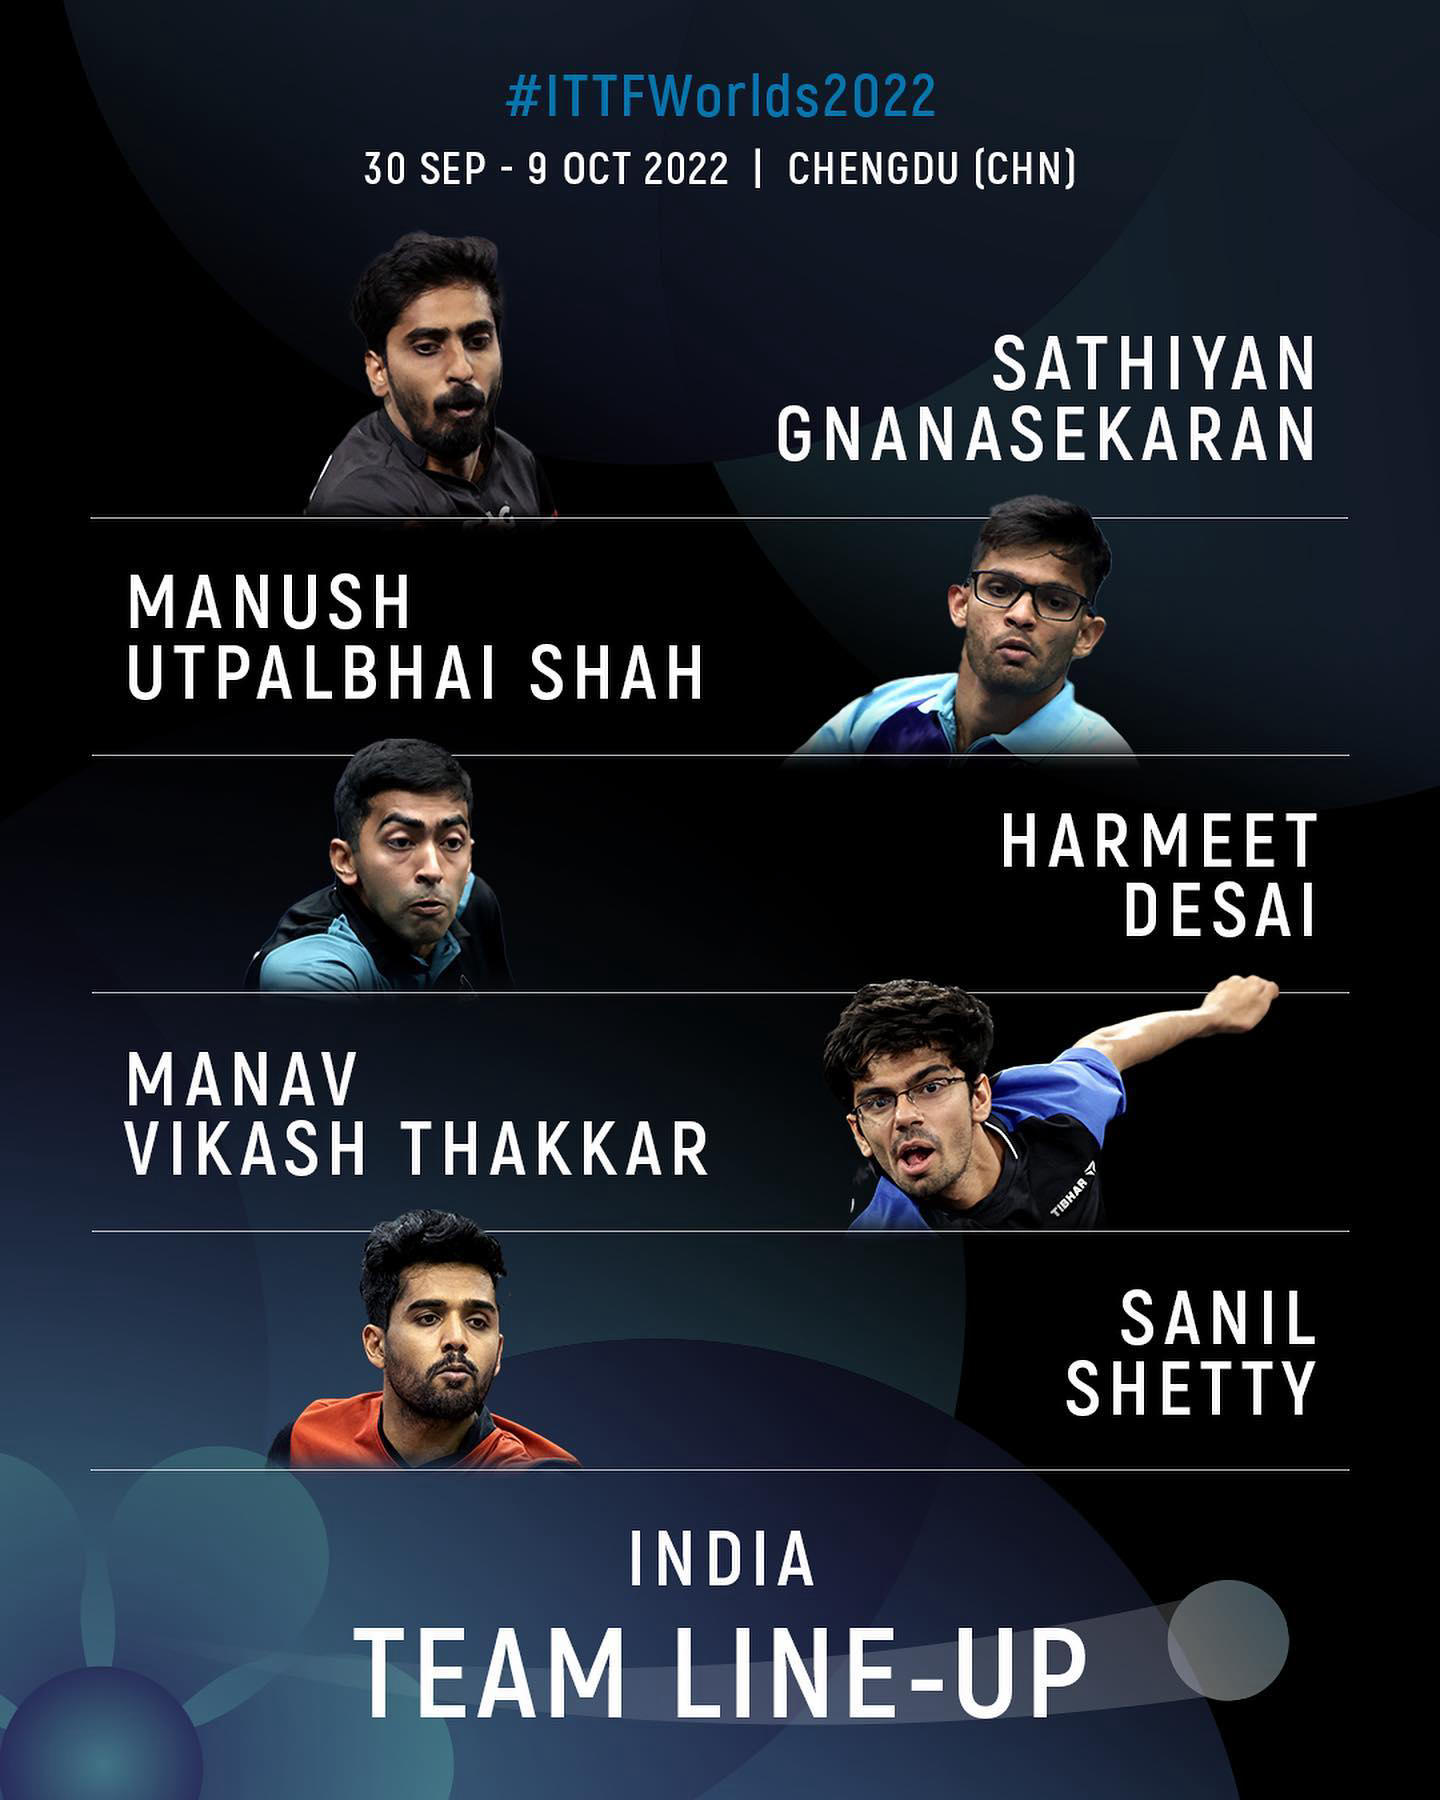 World Table Tennis - Presenting #TeamIndia's line-up for #ITTFWorlds2022